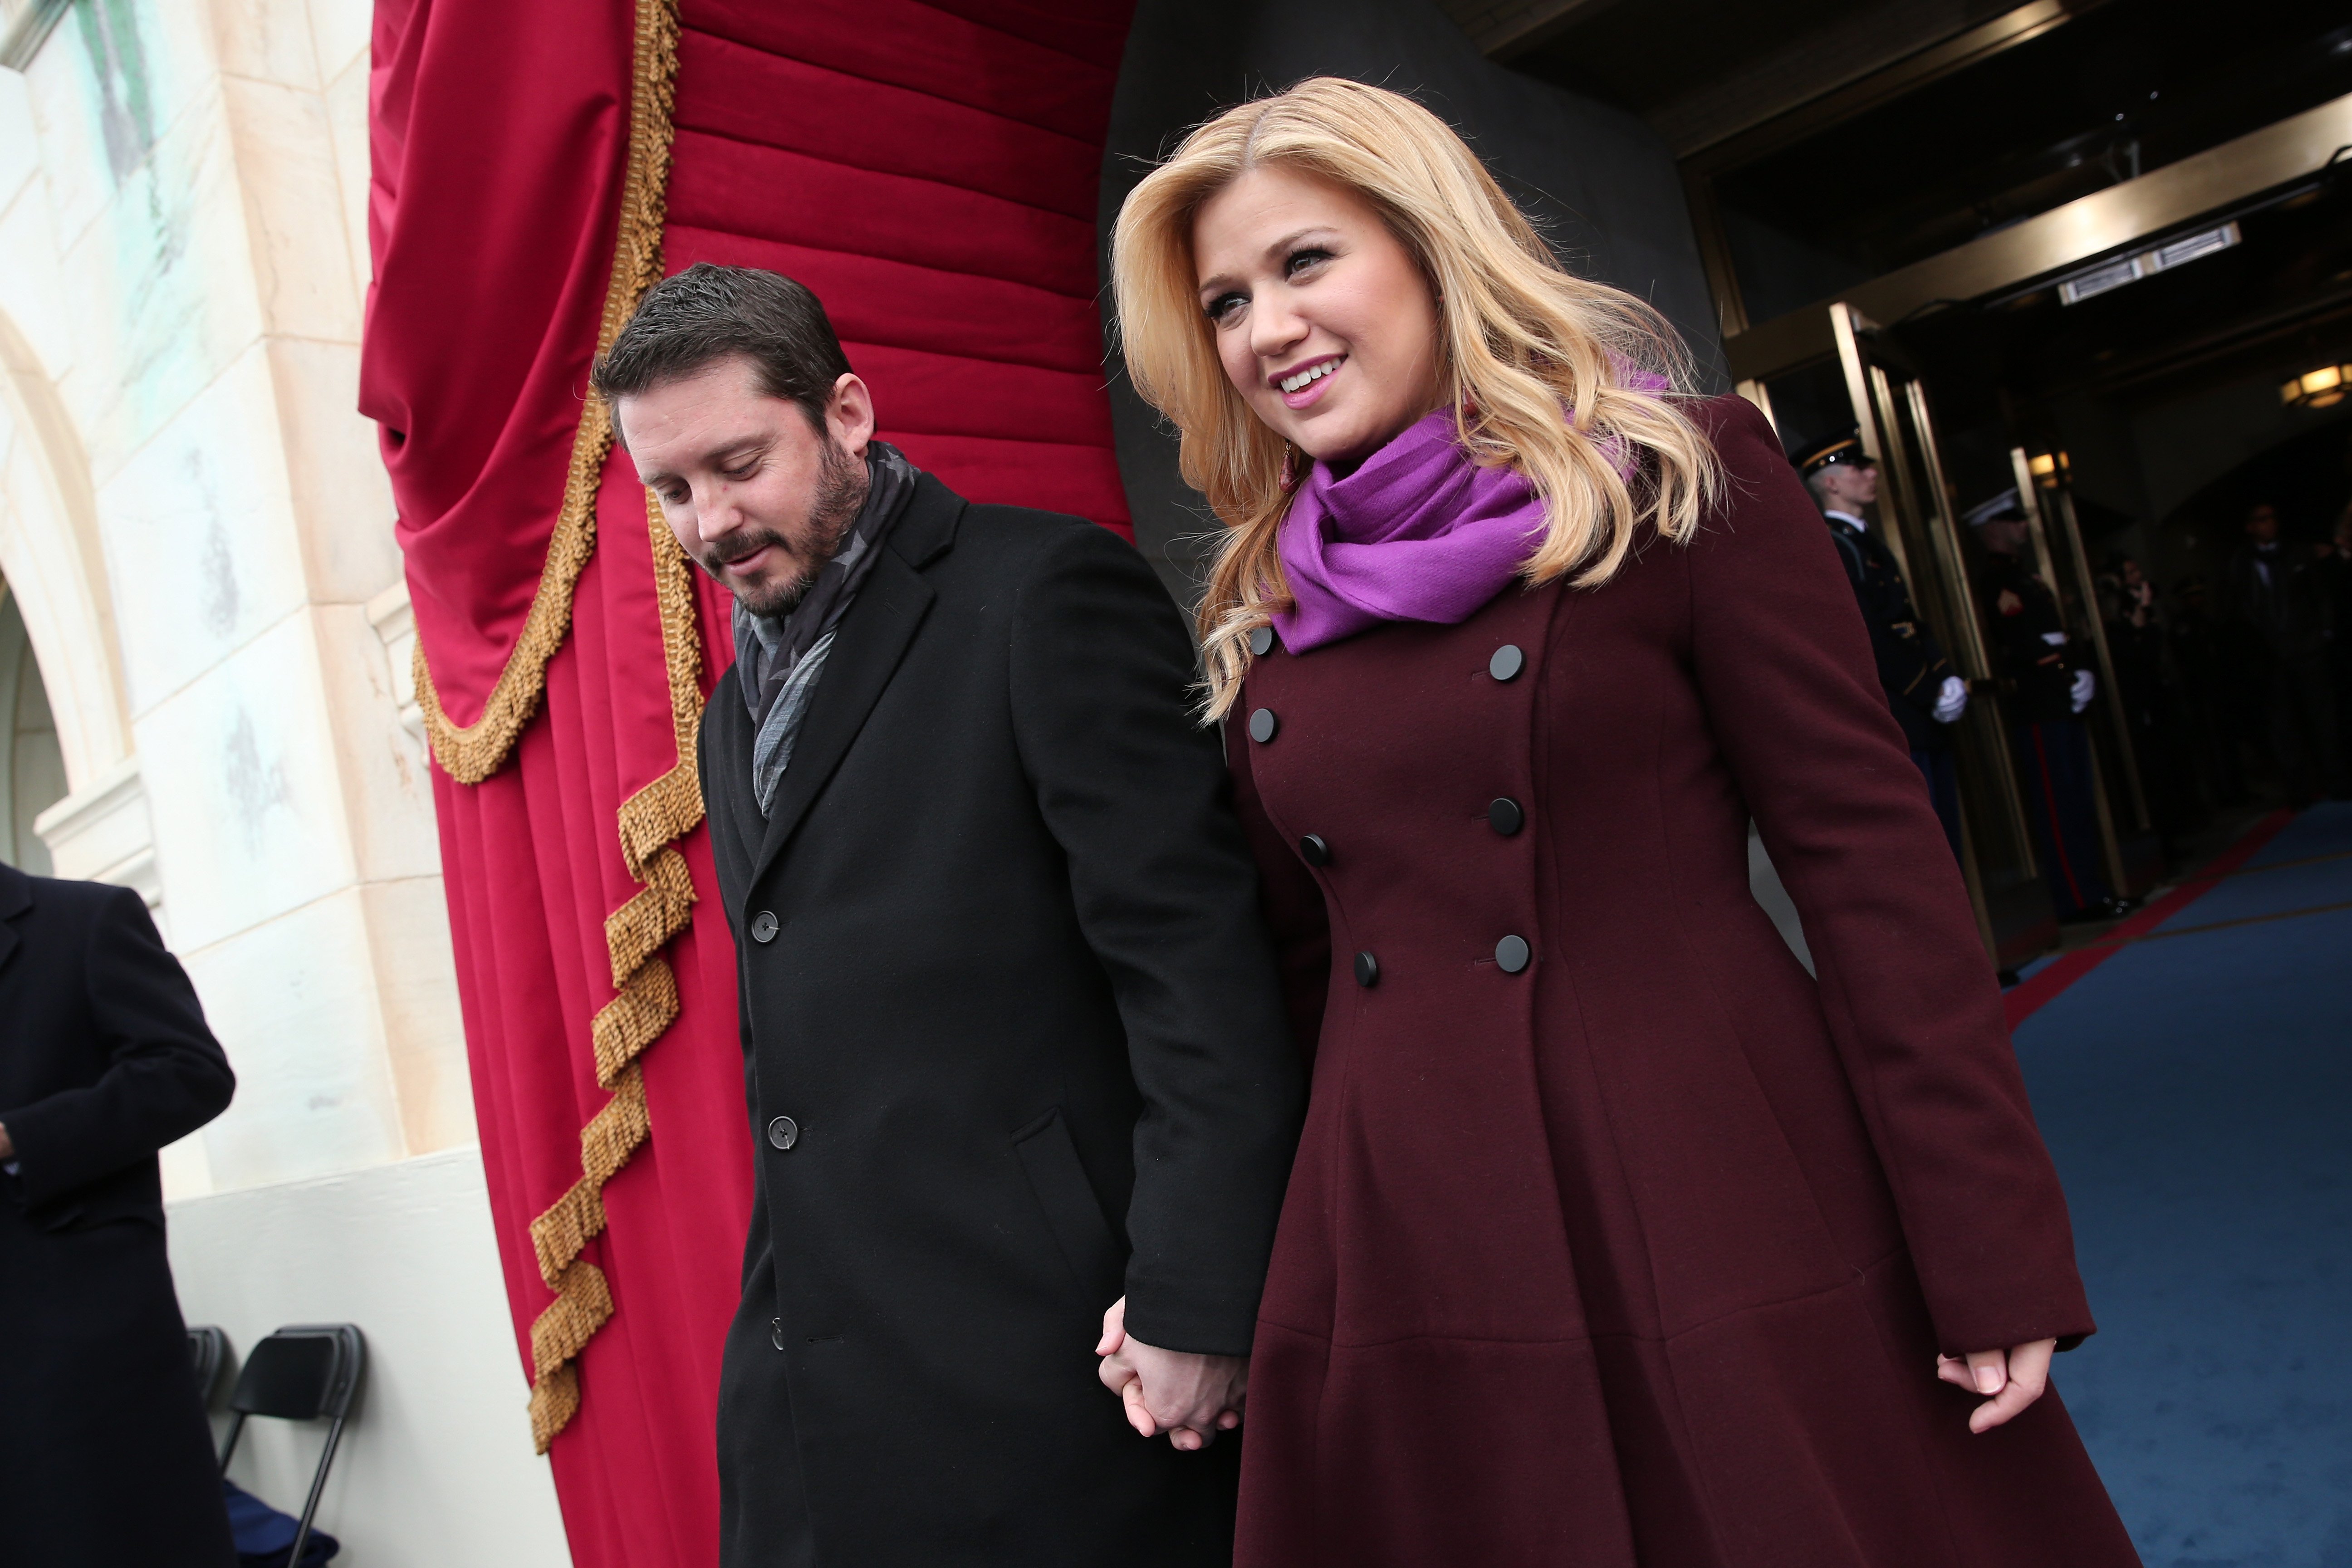 Kelly Clarkson and Brandon Blackstock arrive at the presidential inauguration on the West Front of the U.S. Capitol January 21, 2013 | Photo: Getty Images